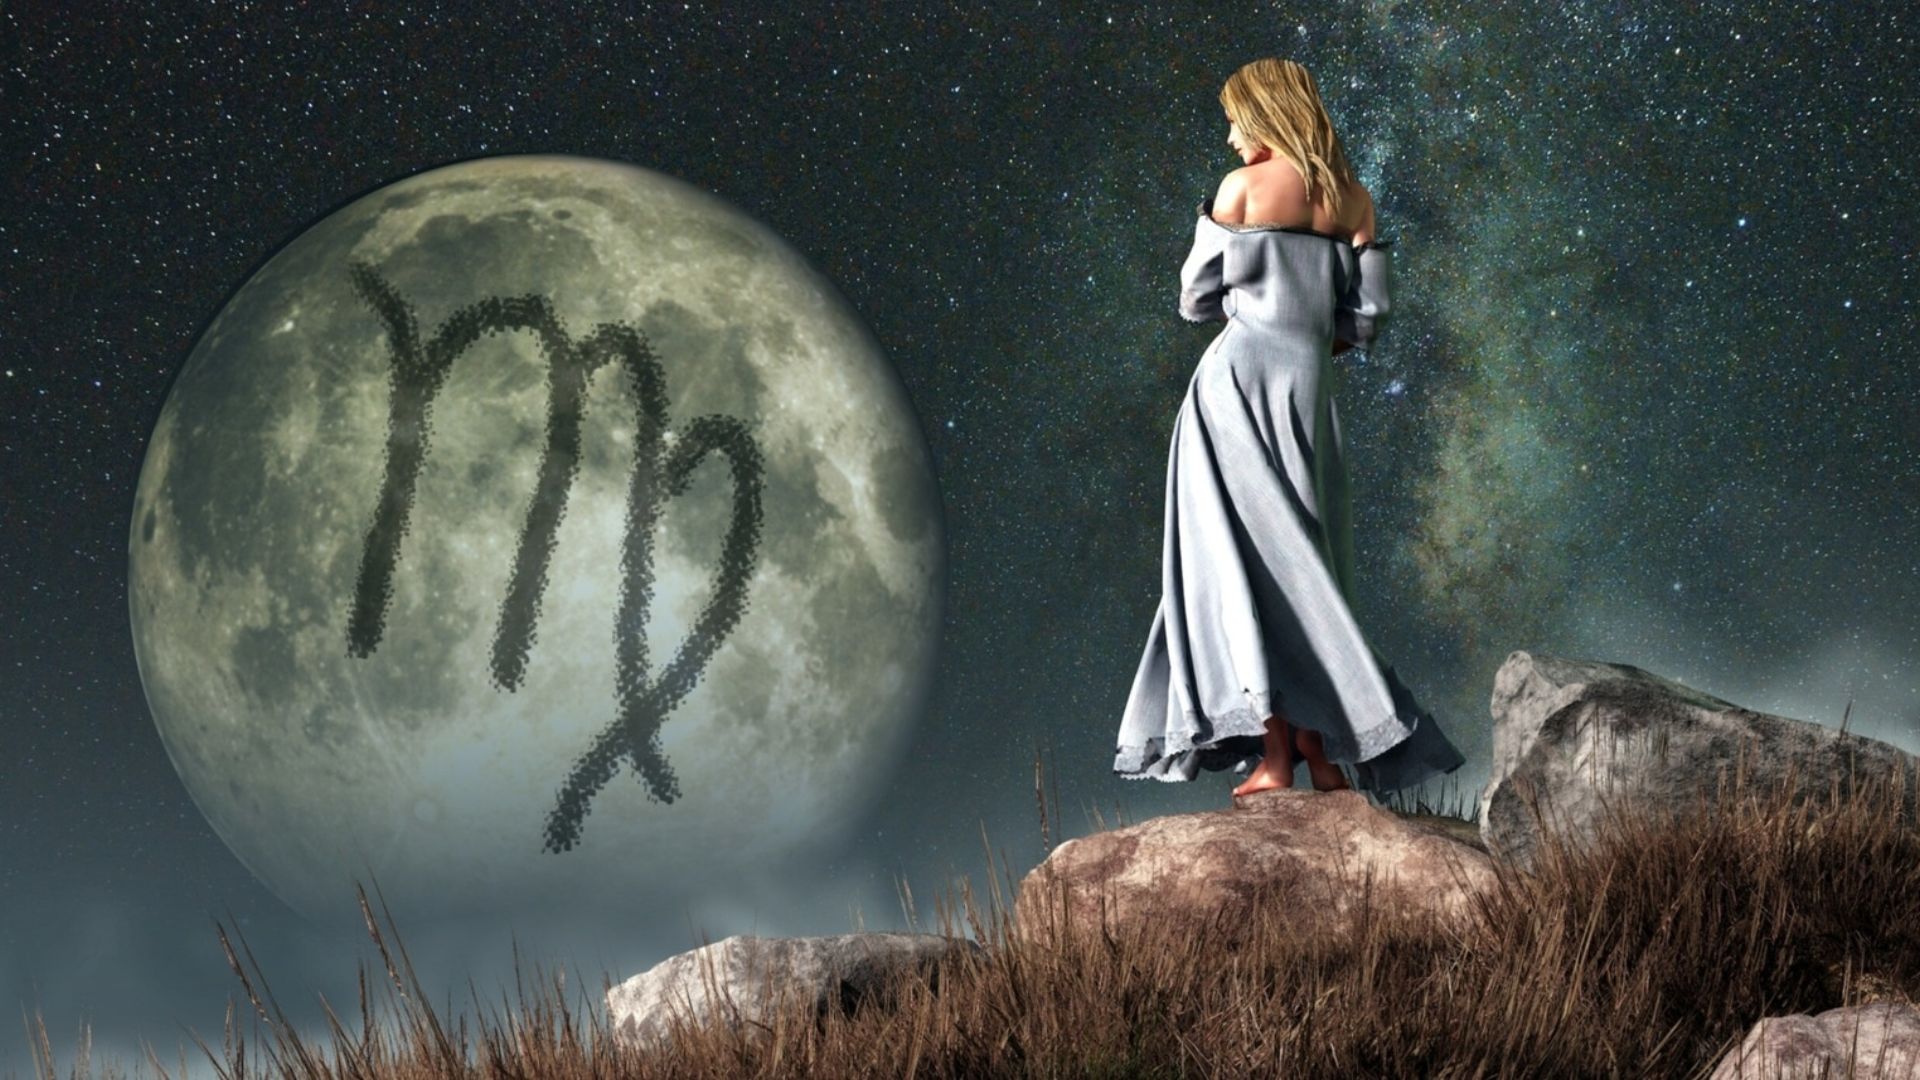 Virgo Sign On Moon And A Woman In White Dress